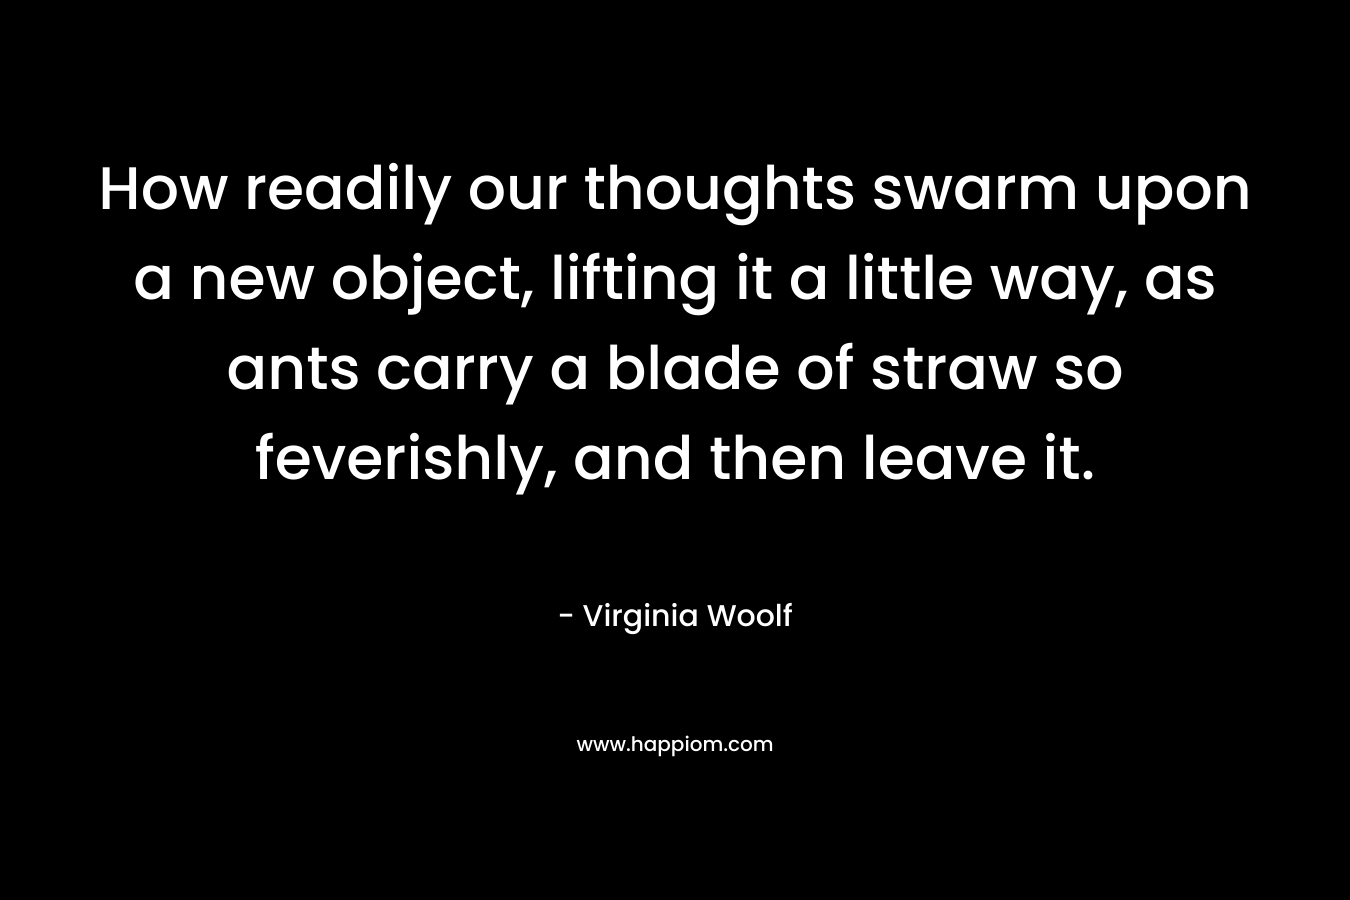 How readily our thoughts swarm upon a new object, lifting it a little way, as ants carry a blade of straw so feverishly, and then leave it. – Virginia Woolf